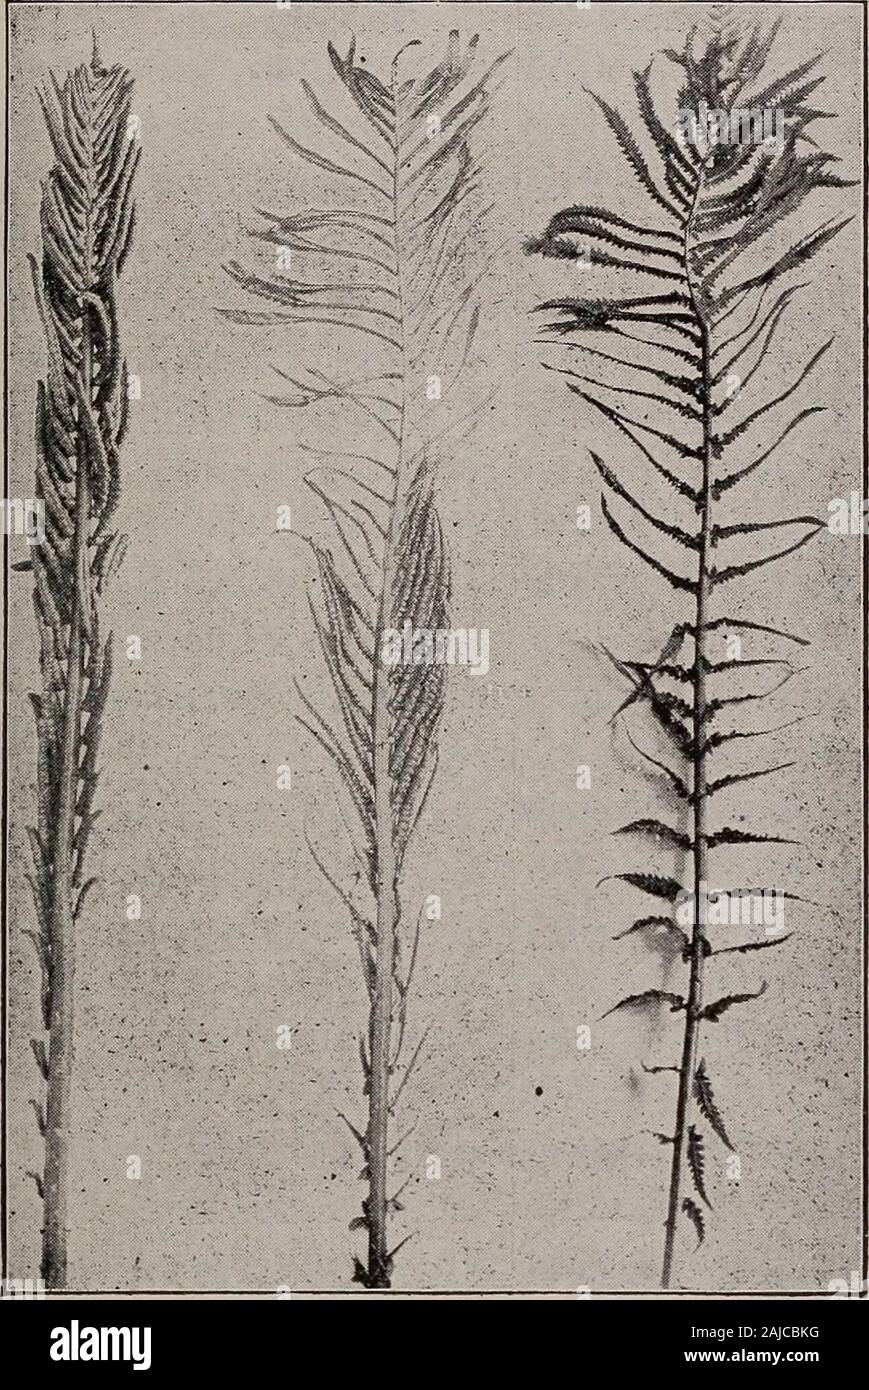 Elementary botany . he sterileleaf. 569. The ostrich fern.—Similar changes were also producedin the case of the ostrich fern, and in fig. 319 is shown at theleft a normal fertile leaf, then one partly changed, and at theright one completely transformed. 570. Dimorphism in tropical ferns.—Very interesting formsof dimorphism are seen in some of the tropical ferns. One ofthese is often seen growing in plant conservatories, and is knownas the staghorn fern (Platycerium alcicorne). This in naturegrows attached to the trunks of quite large trees at considerableelevations on the tree, sometimes surro Stock Photo